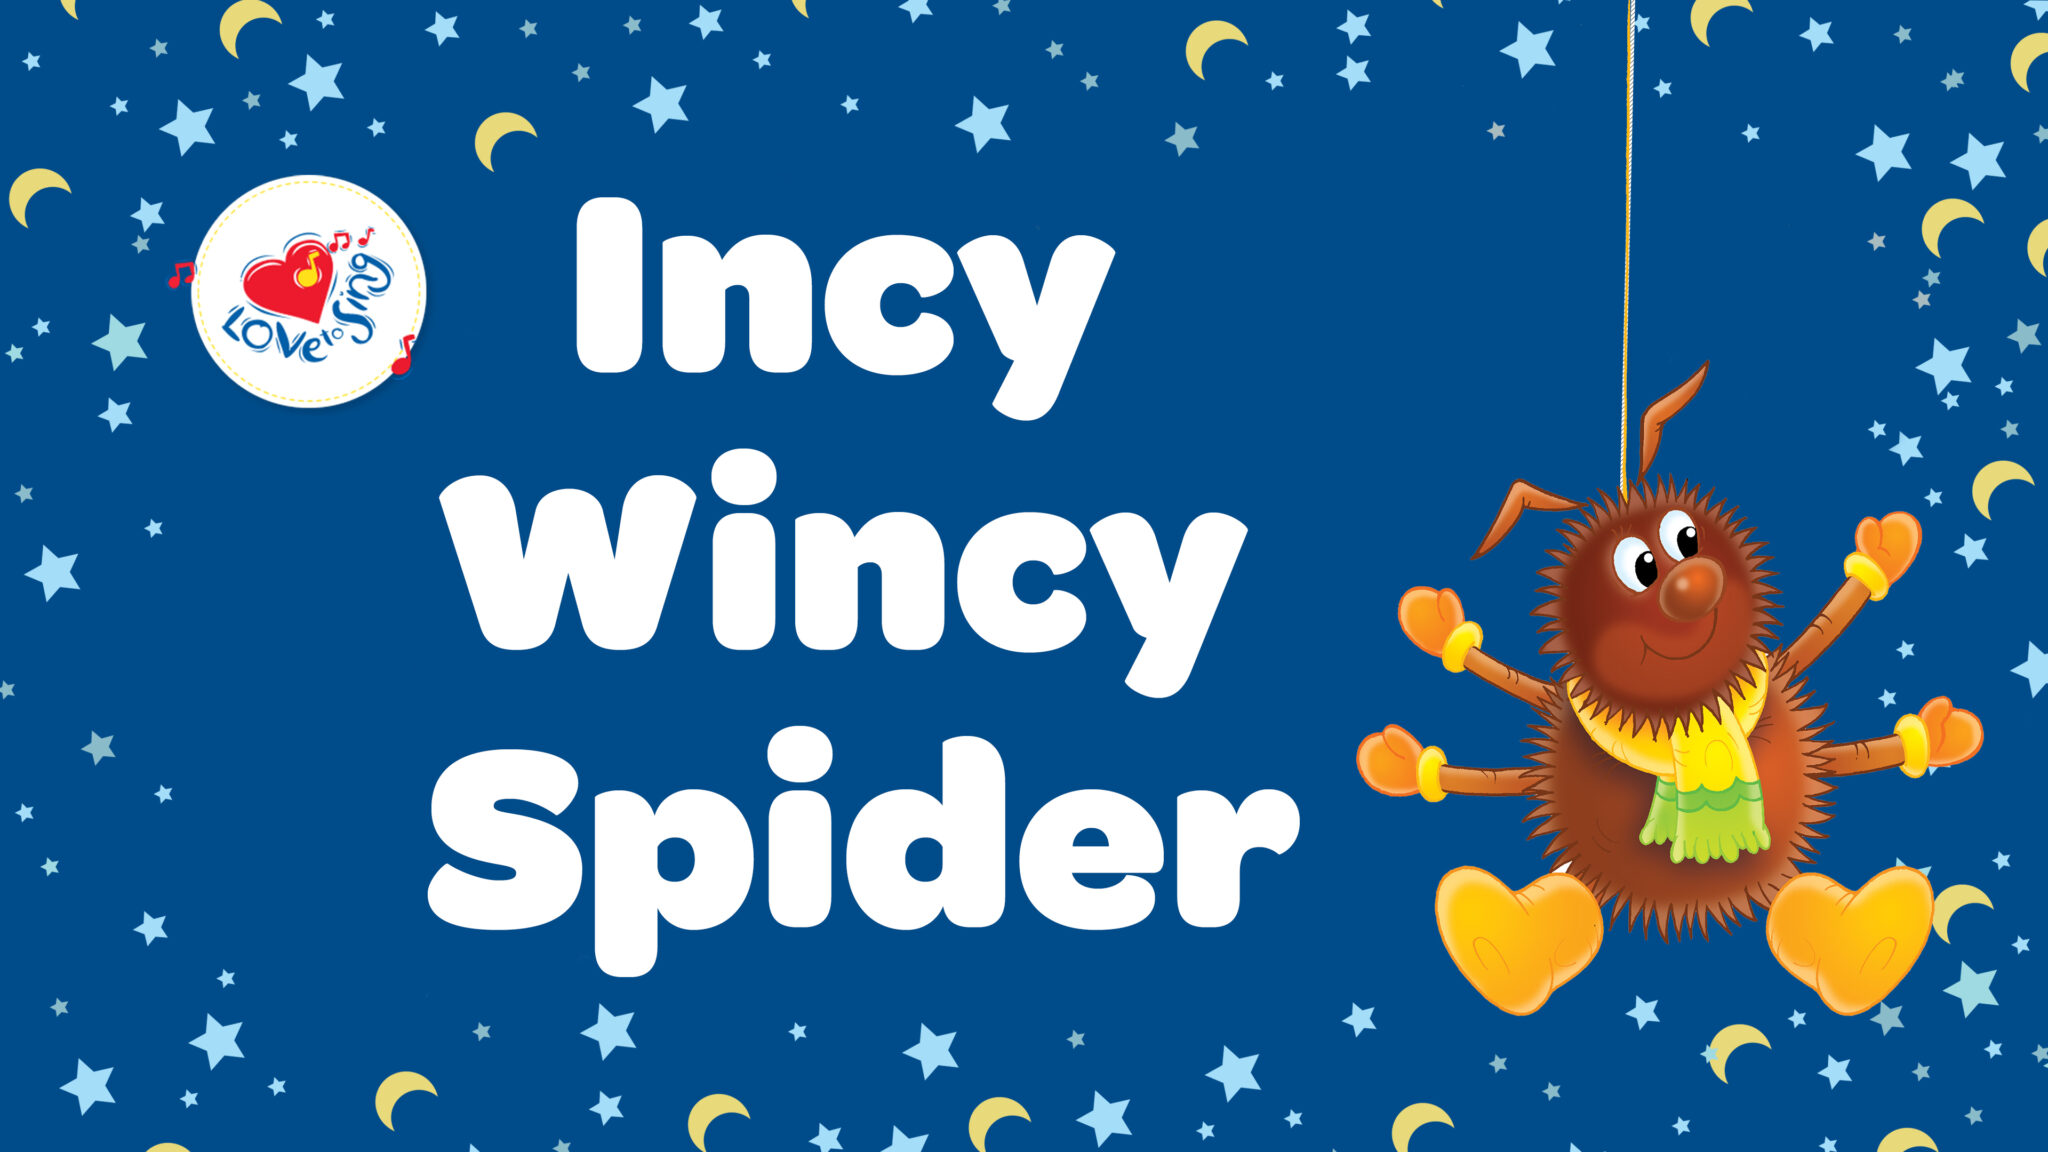 Incy Wincy Spider Lyrics and Actions + FREE Activities - Learning